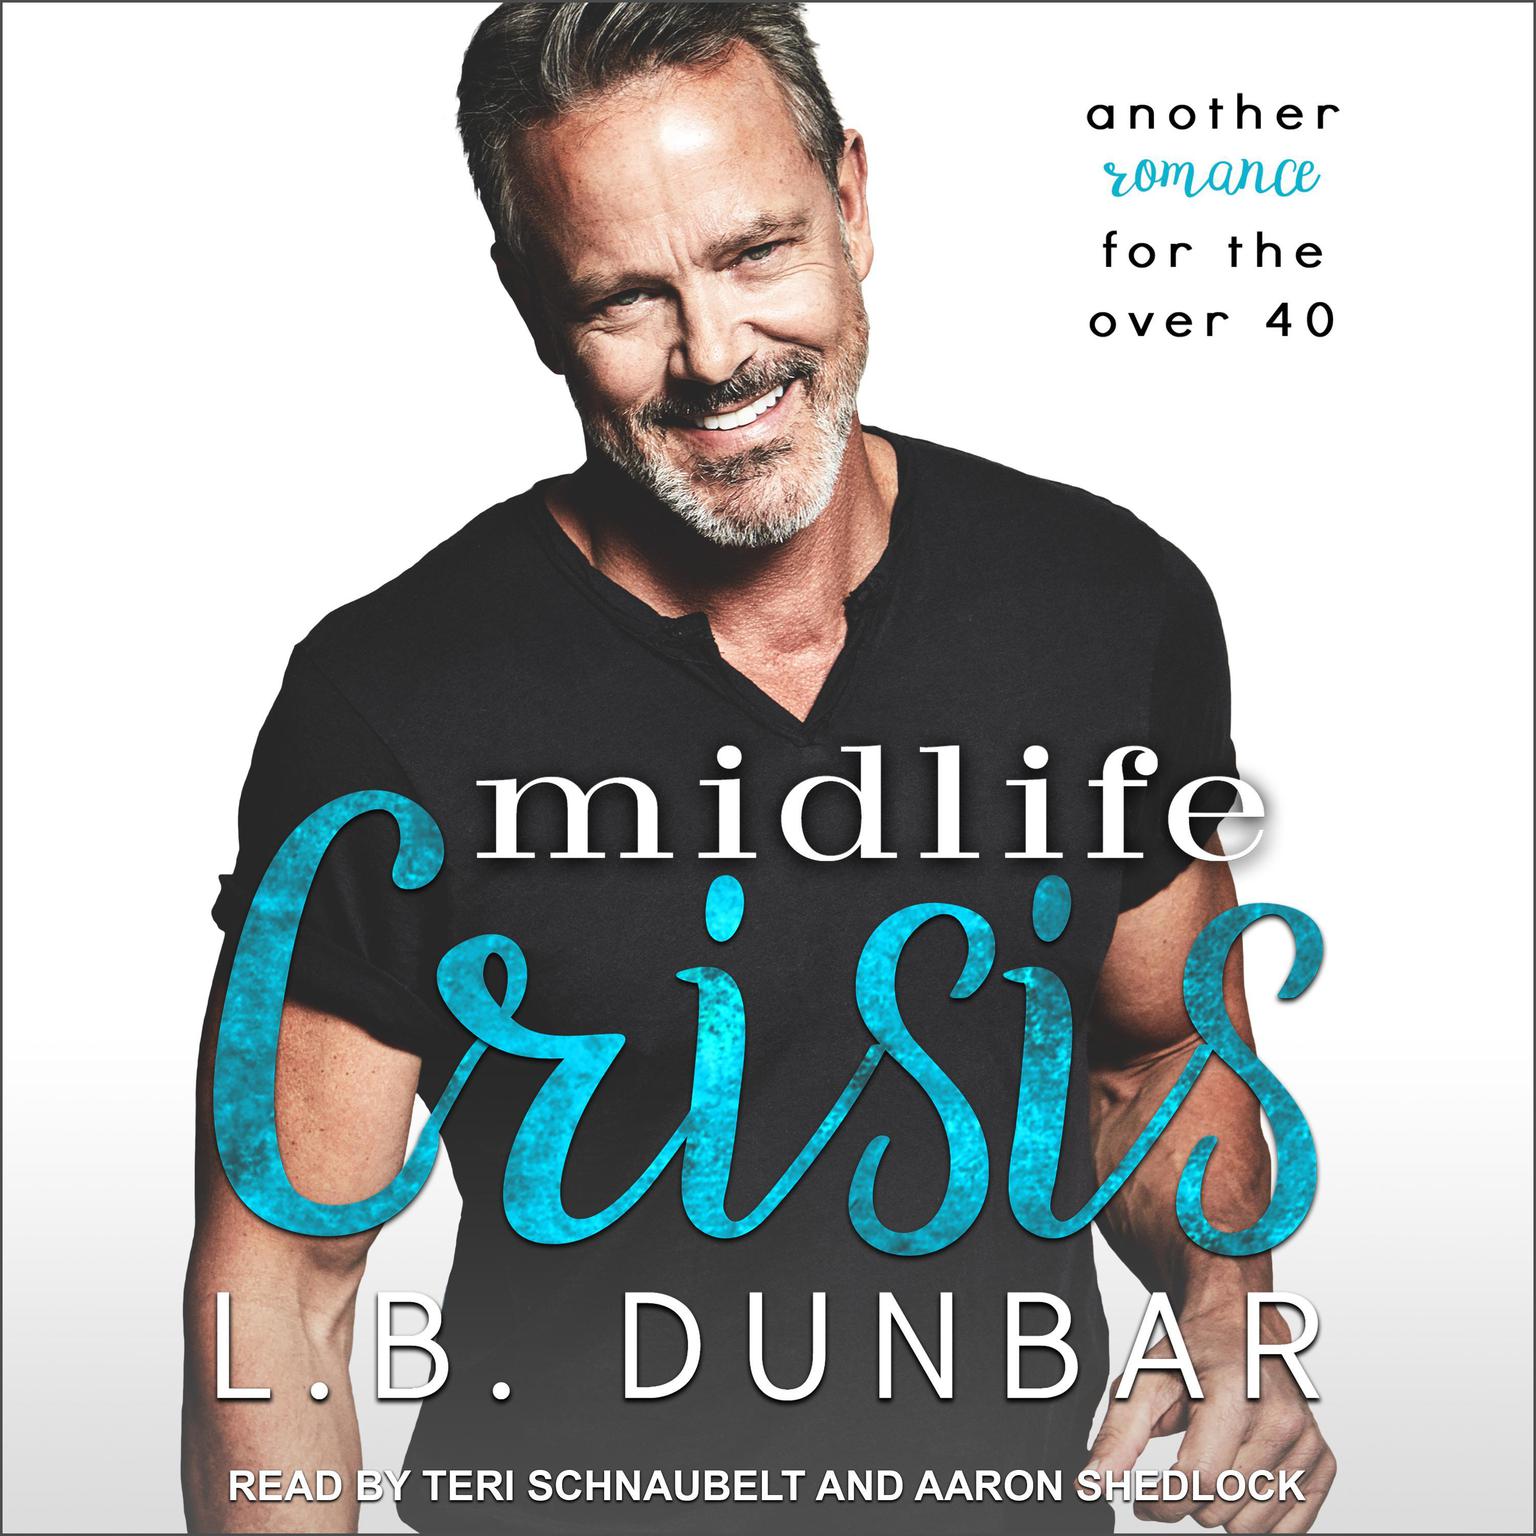 Midlife Crisis: Another romance for the over 40 Audiobook, by L.B. Dunbar